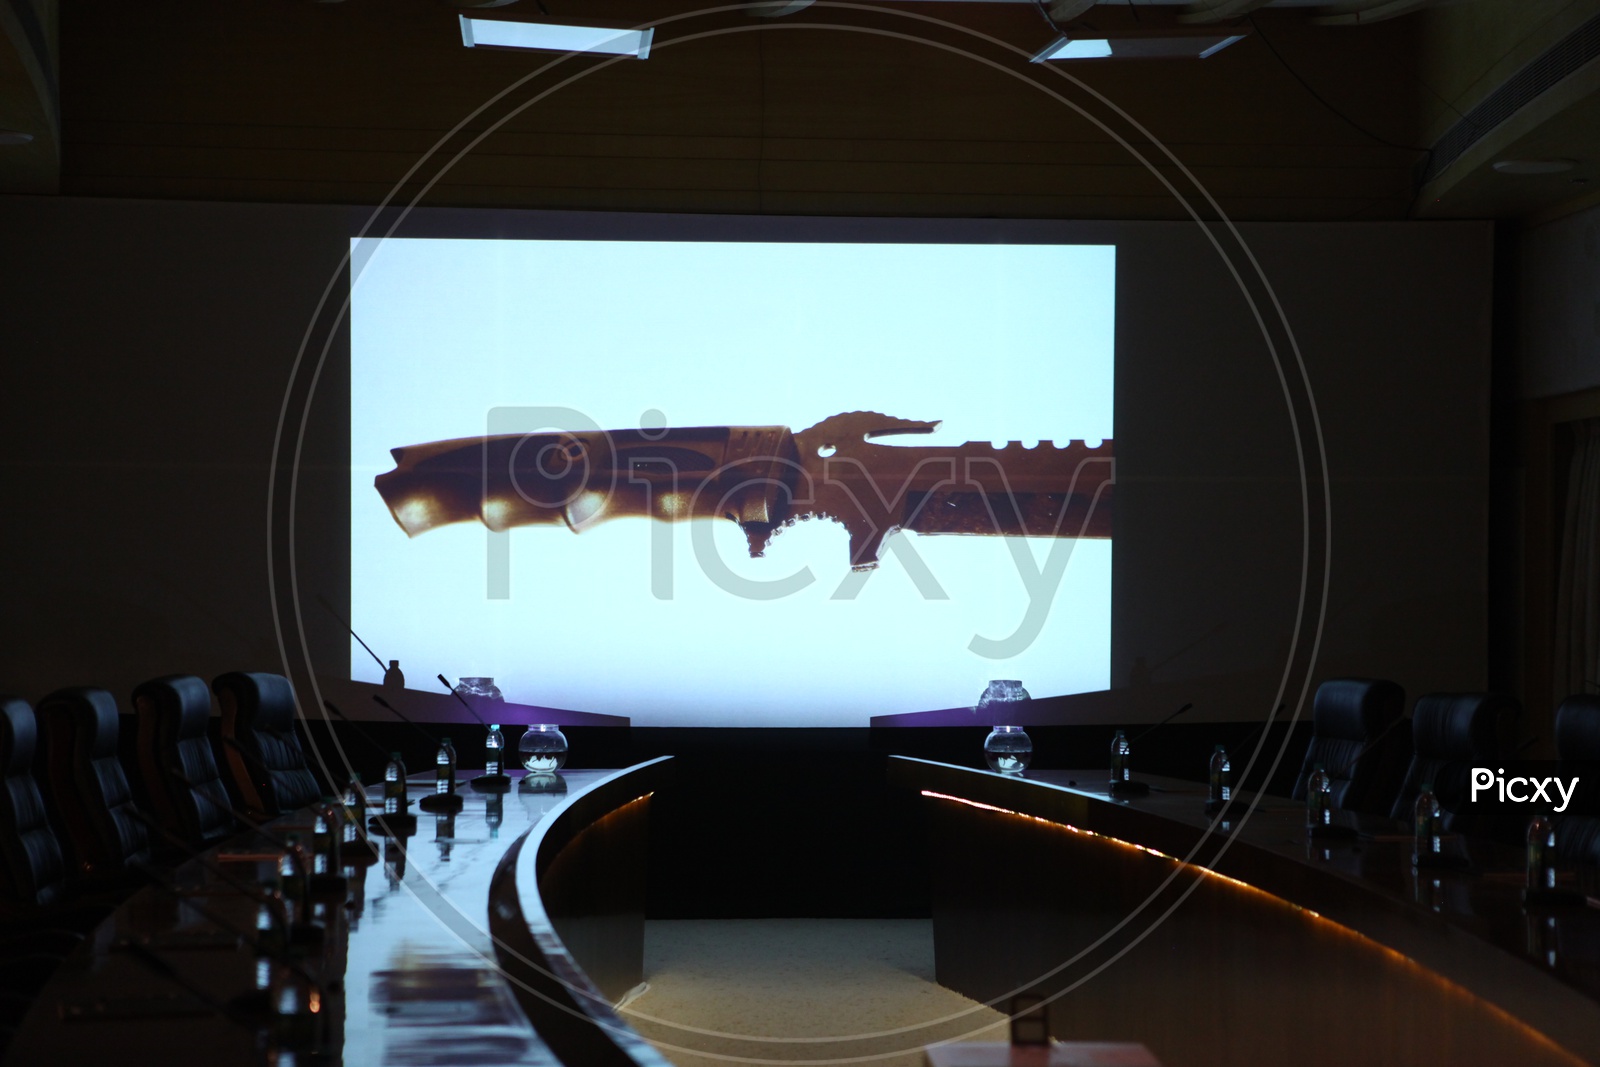 Projector display in a conference hall